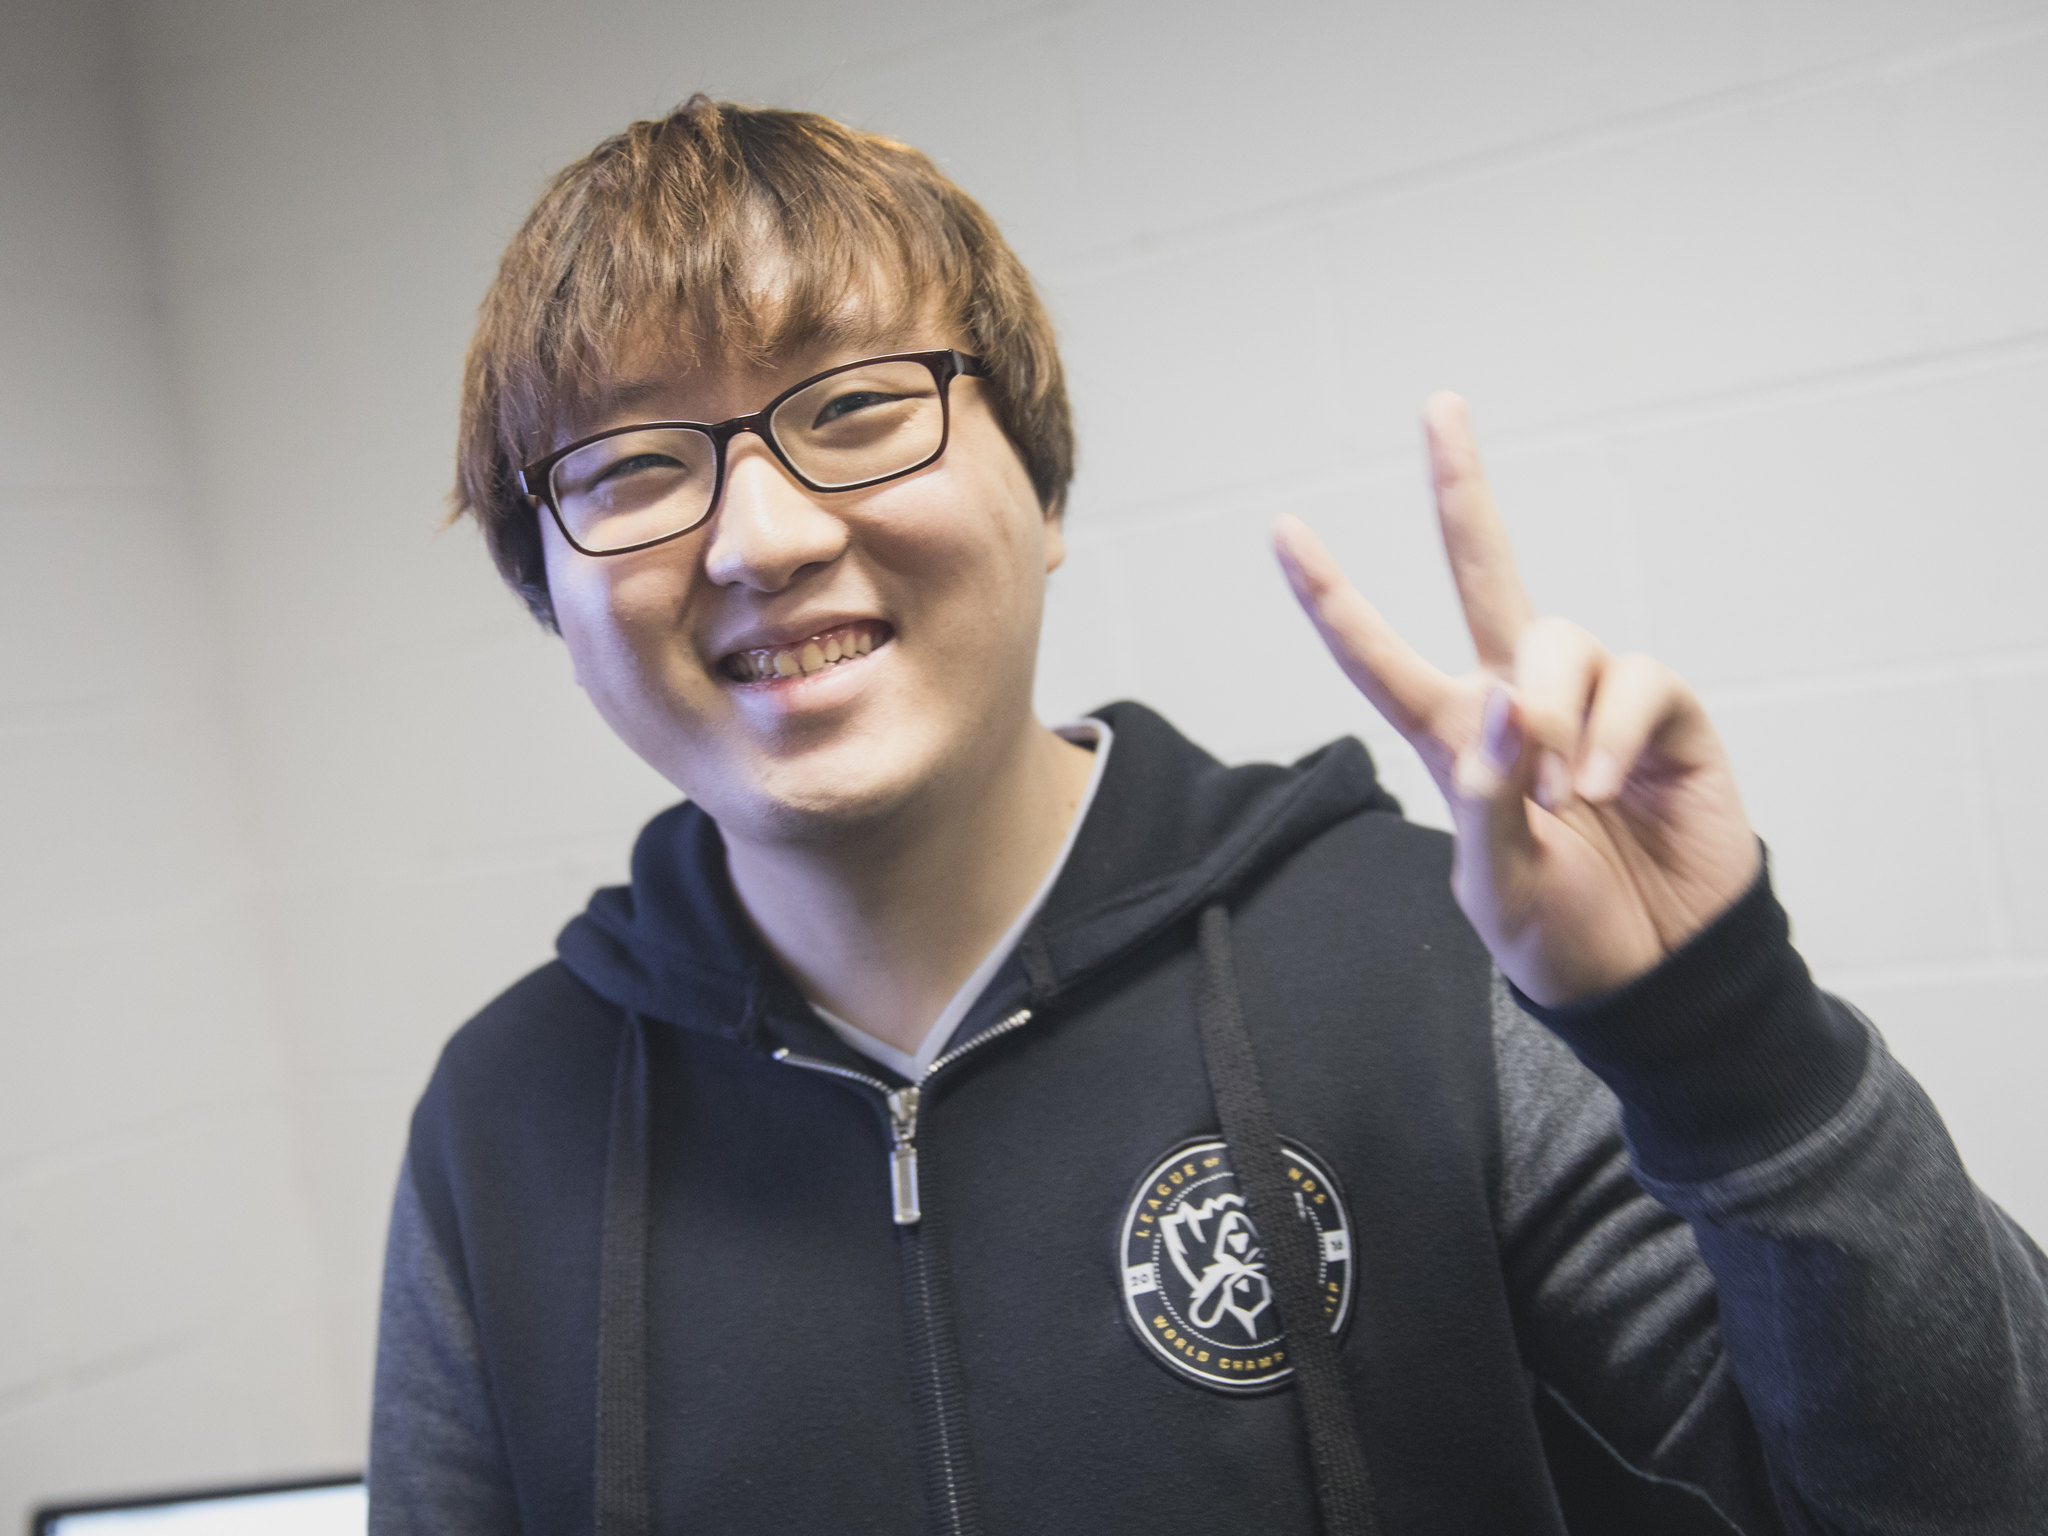 SK Gaming’s Jungler Trick Is Looking For Opportunities For Upcoming League Of Legends Season